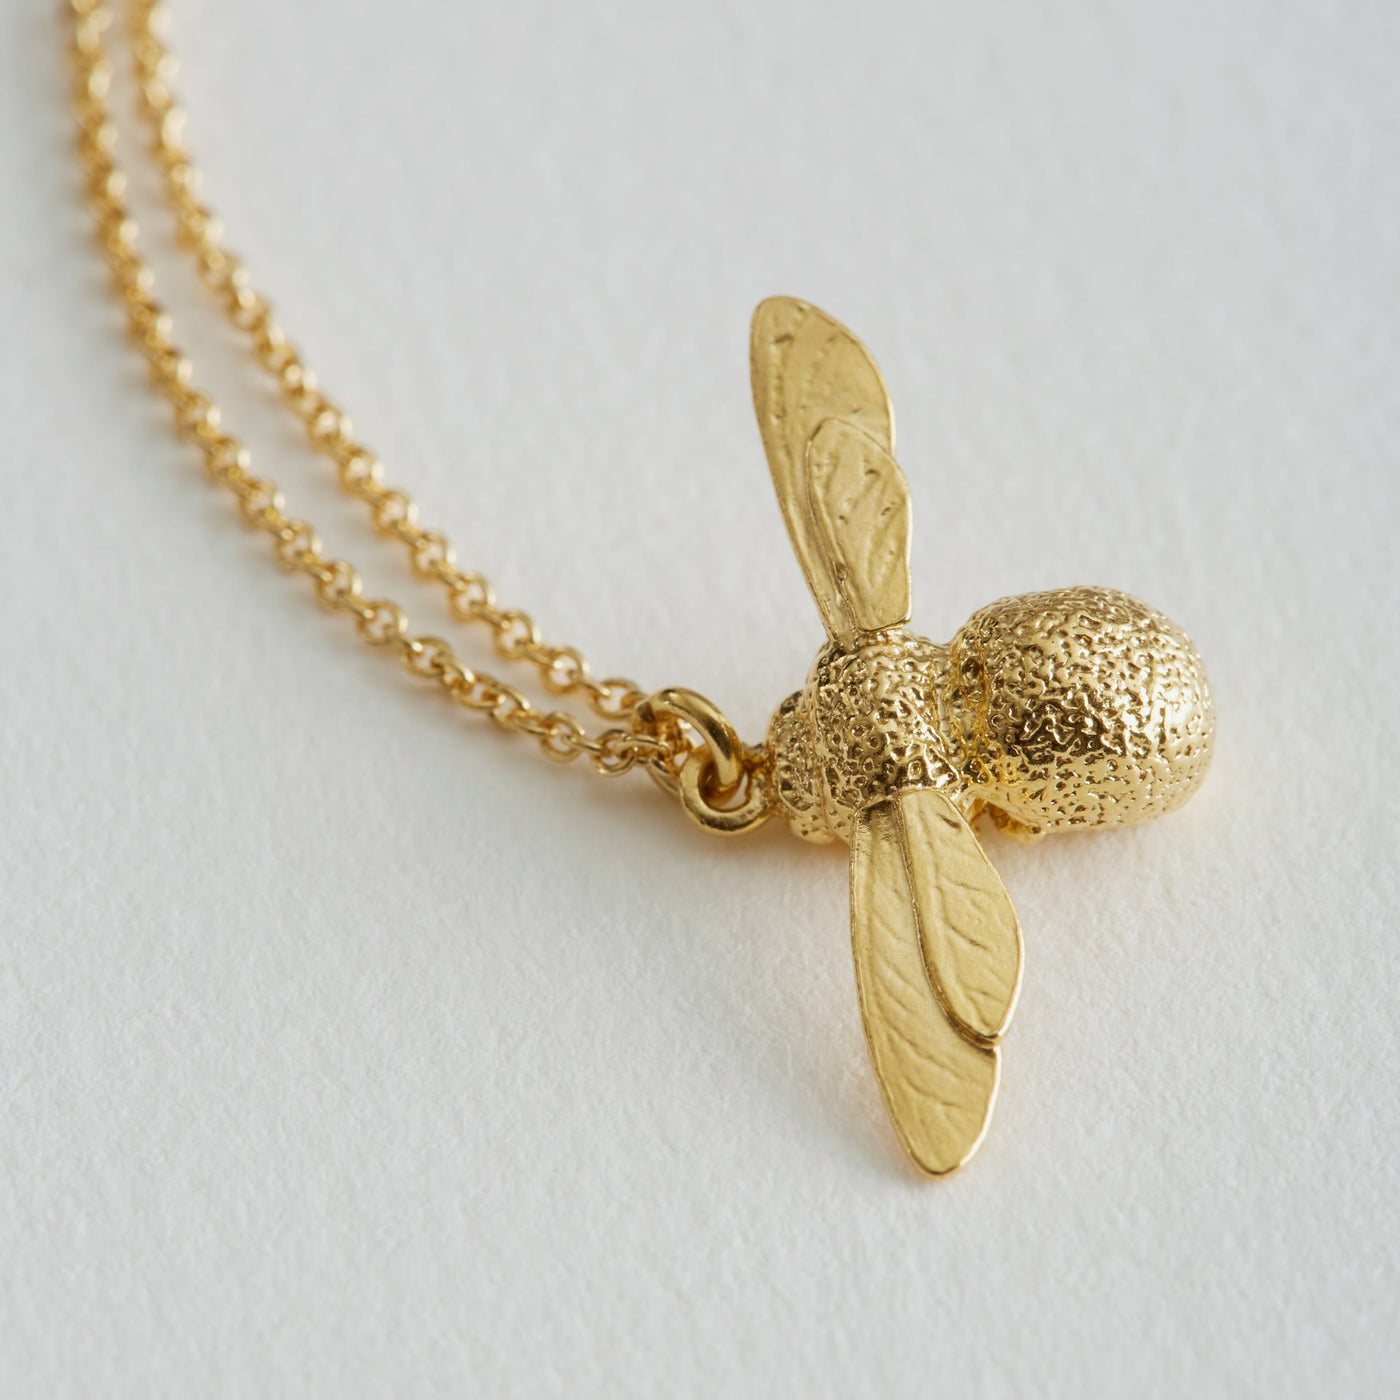 gold baby bee necklace on a gold chain made by Alex Monroe for Kirsty Taylor Goldsmiths Corbridge